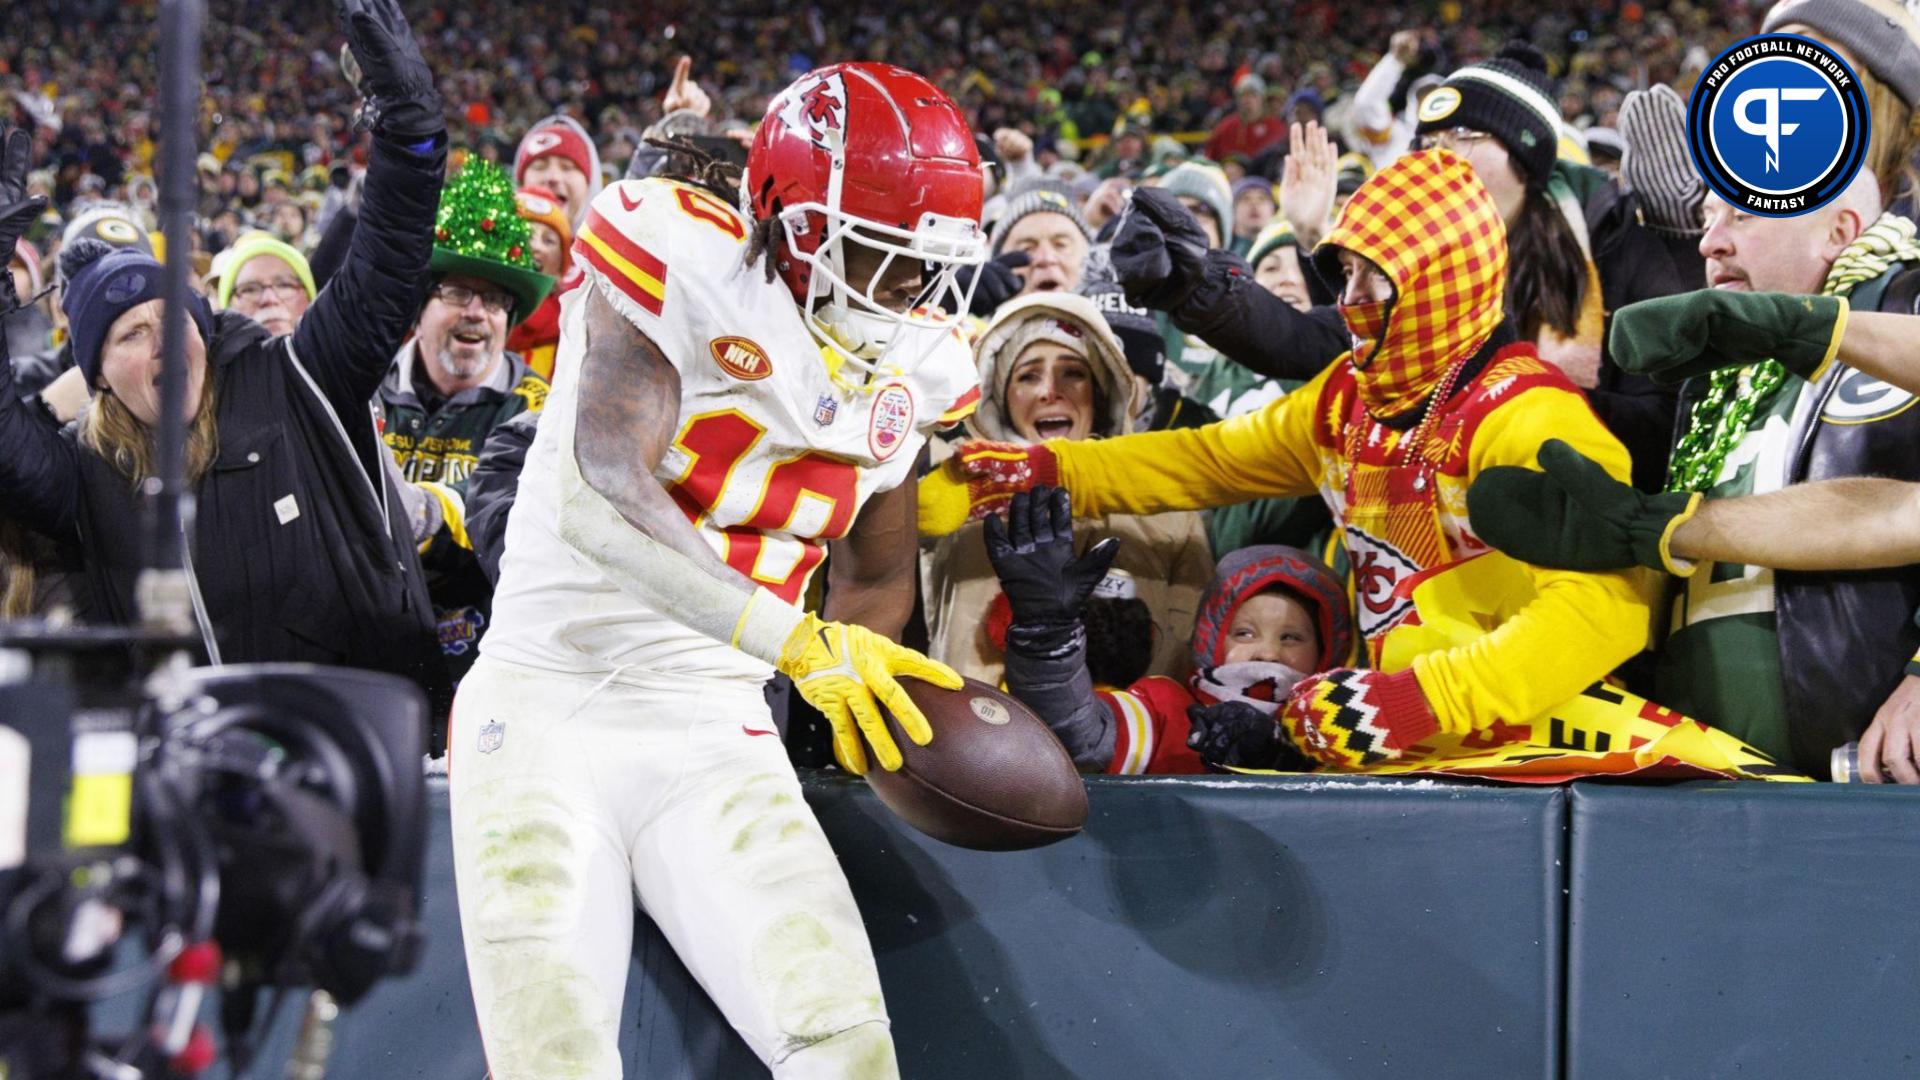 Kansas City Chiefs running back Isiah Pacheco (10) celebrates after scoring a touchdown during the third quarter against the Green Bay Packers at Lambeau Field.